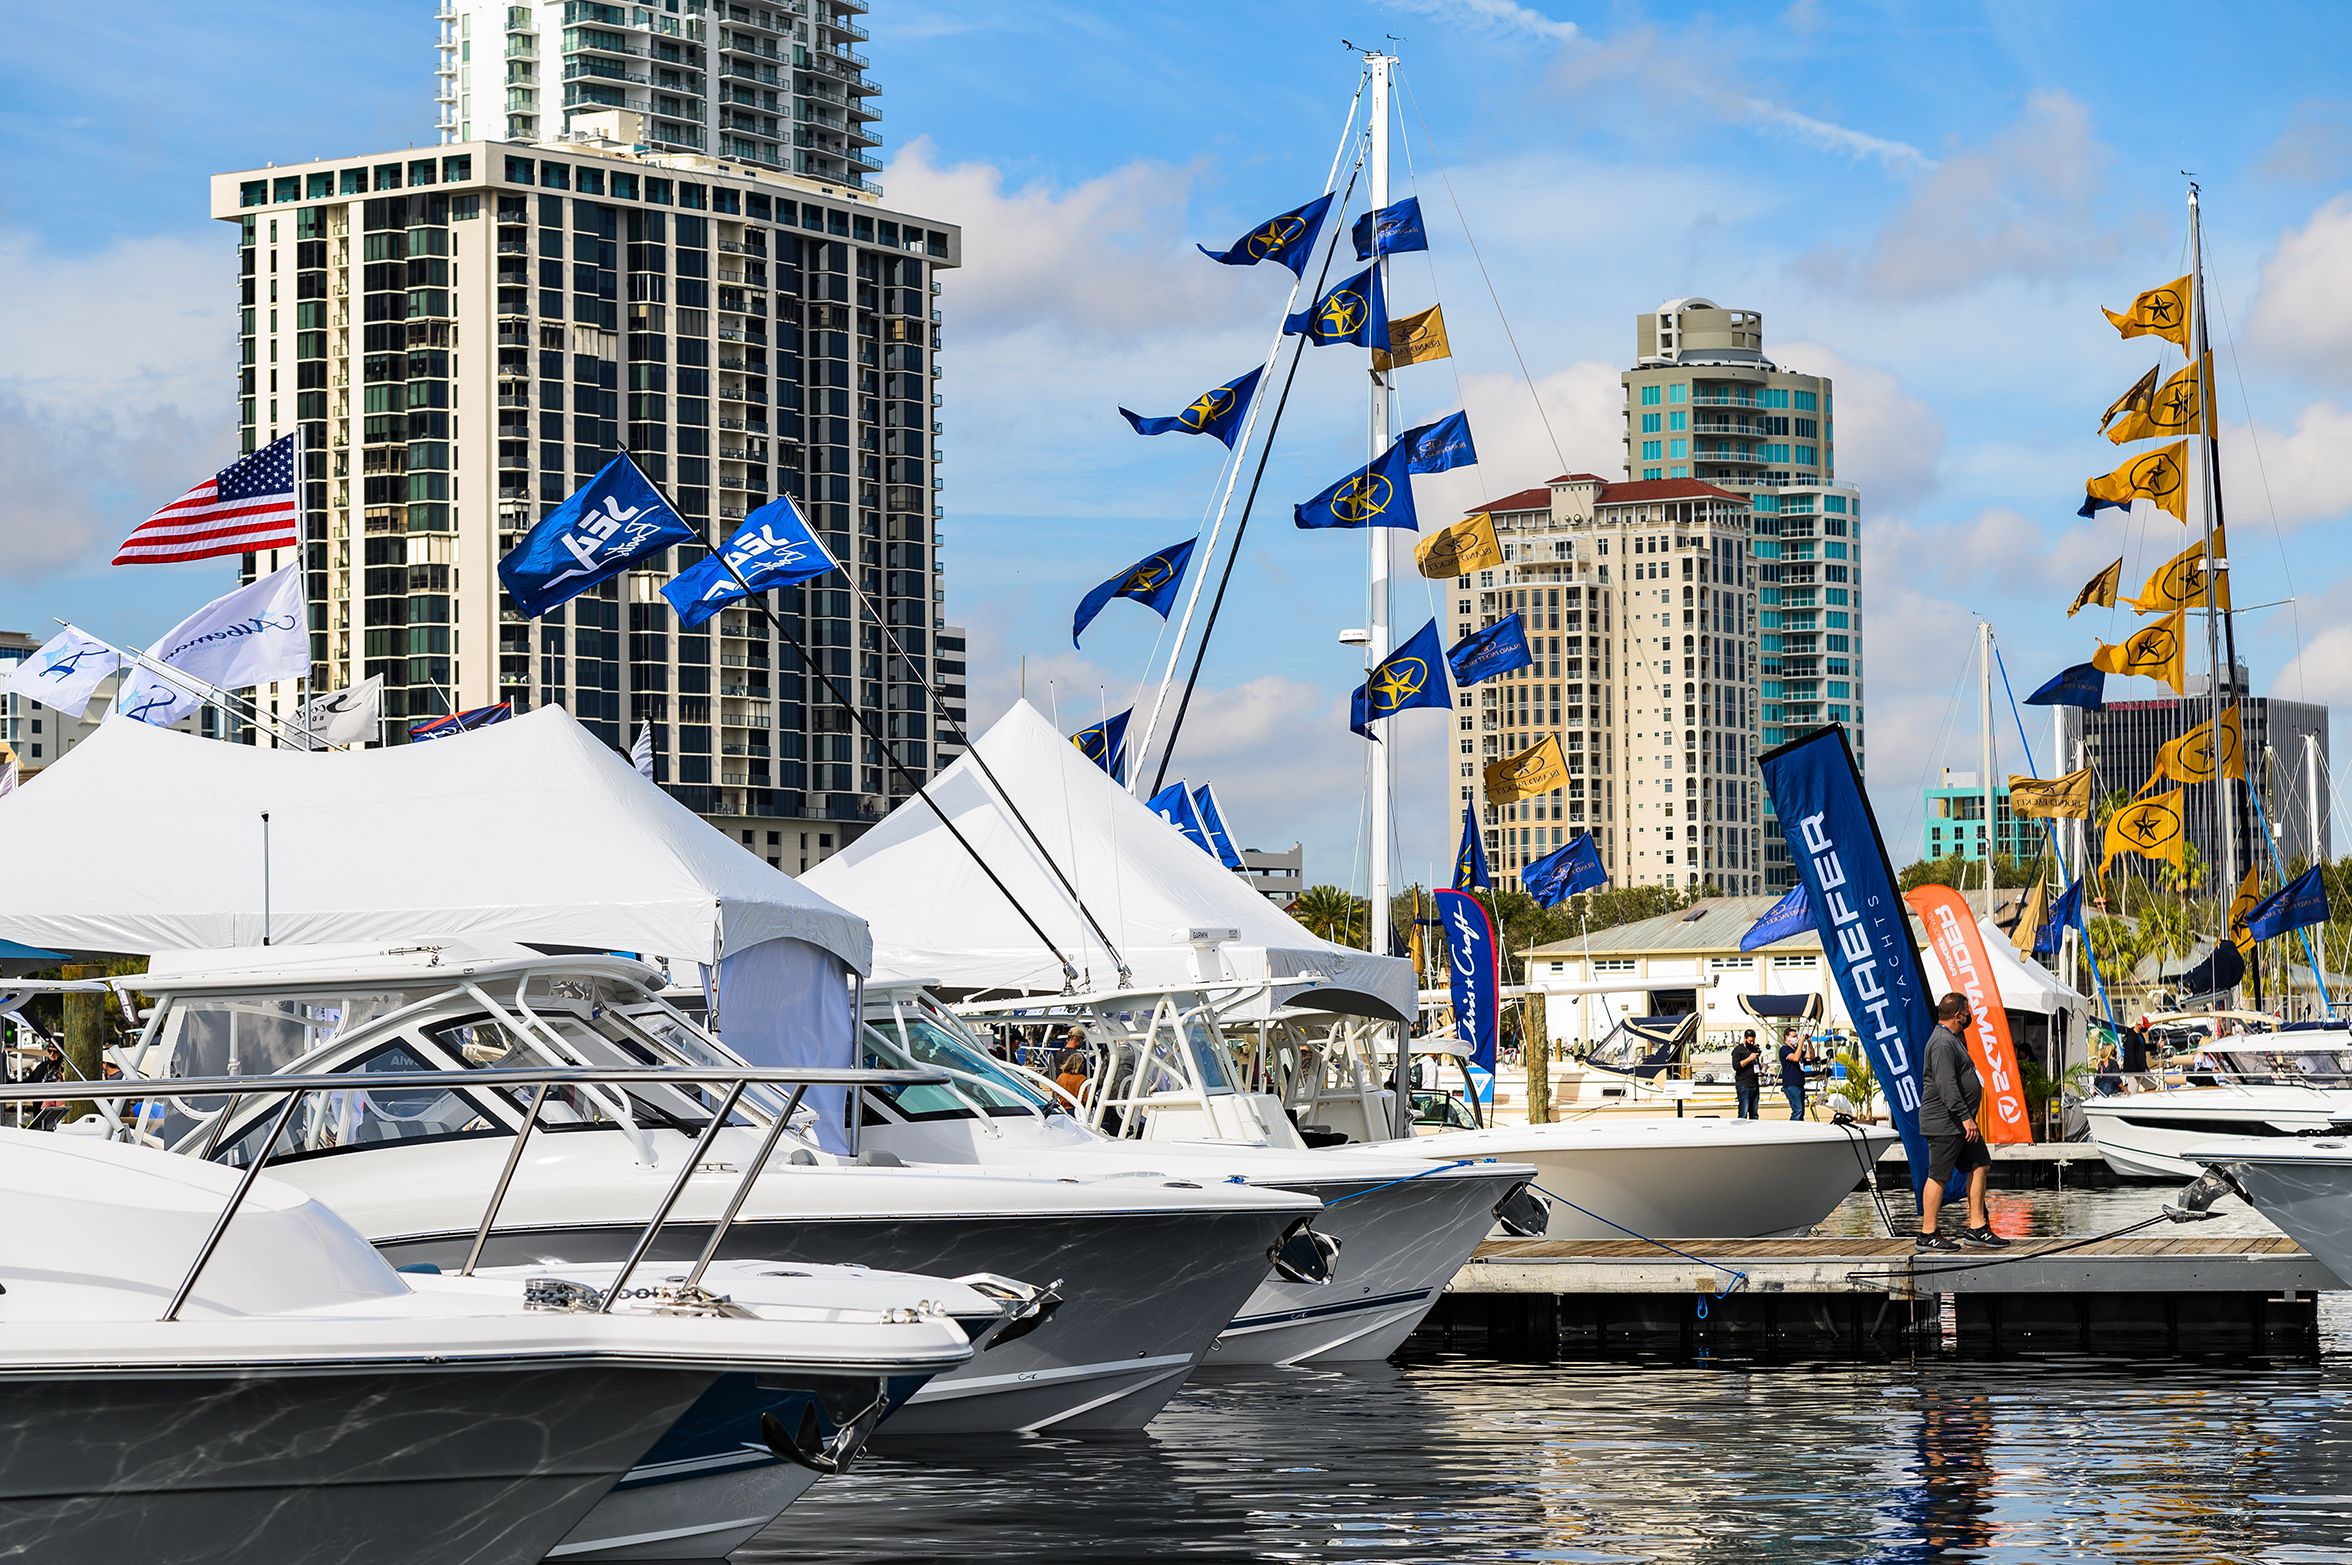 St. Petersburg Power & Sailboat show marks 44th year Tampa Bay